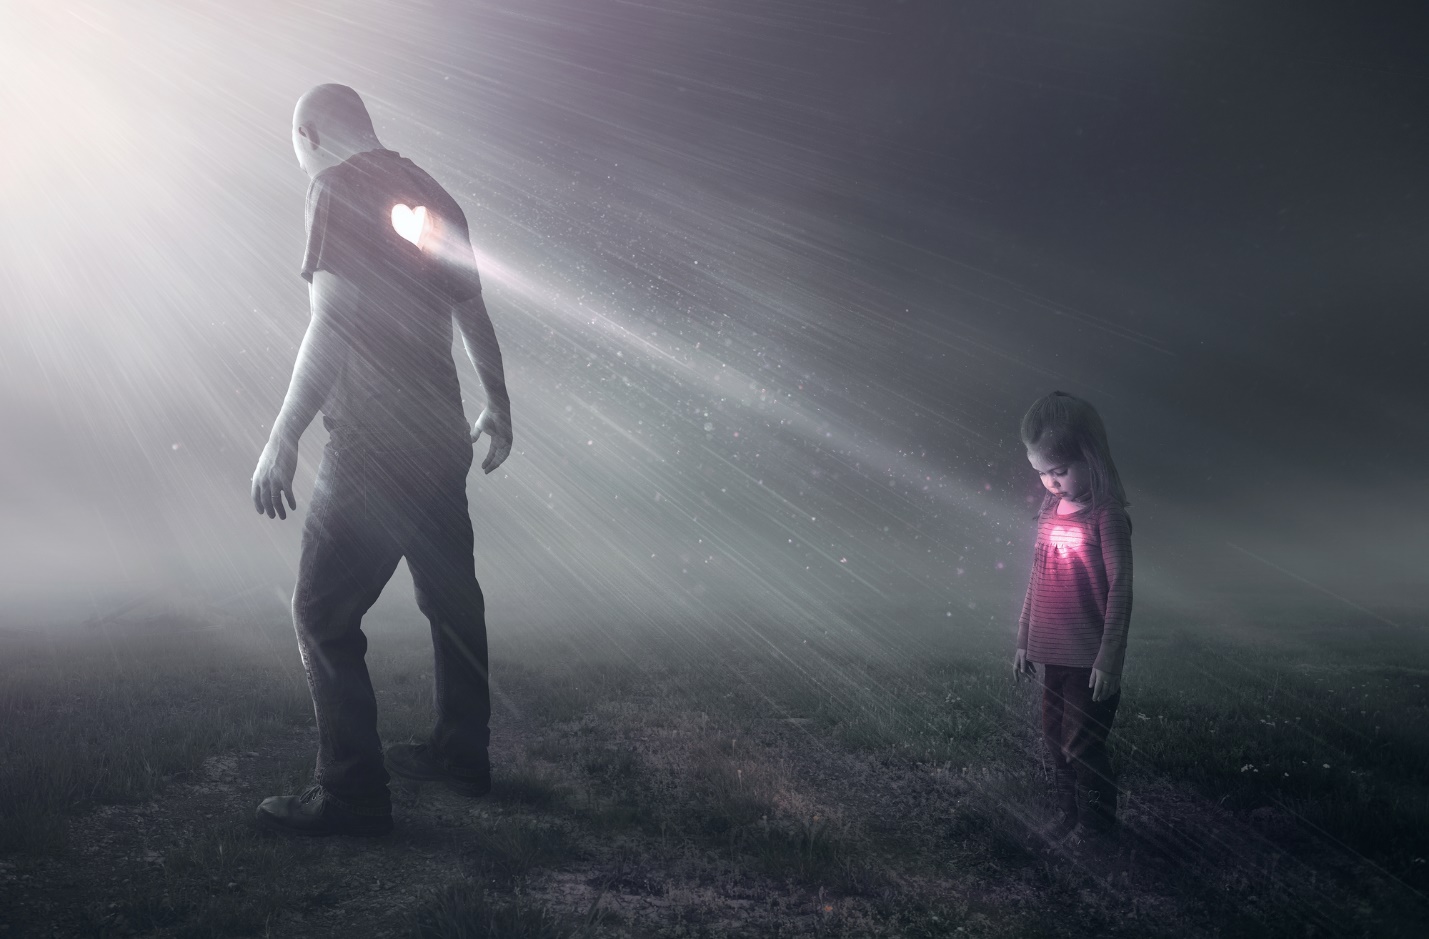 A person and a child walking in the fog

Description automatically generated with low confidence